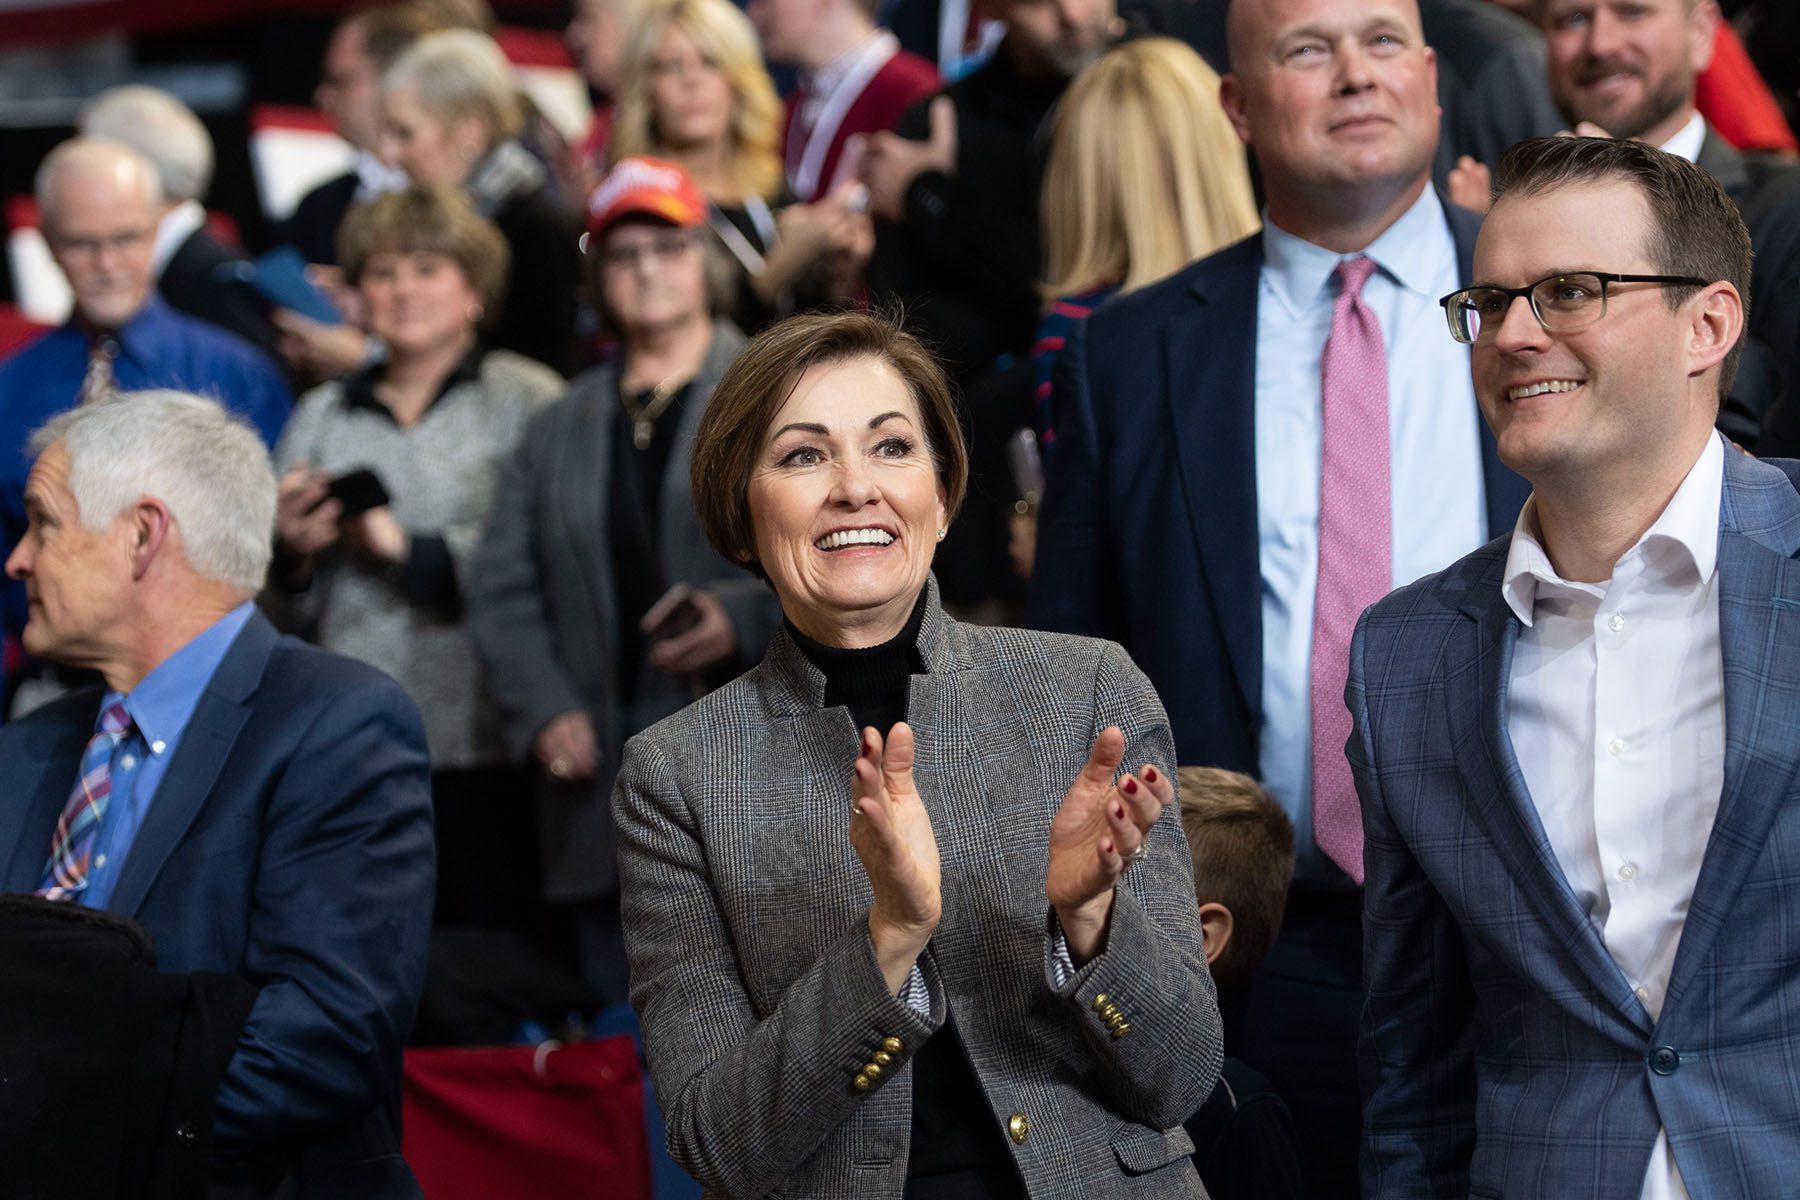 Kim Reynolds cheers and claps from the crowd at a "Keep America Great" rally.